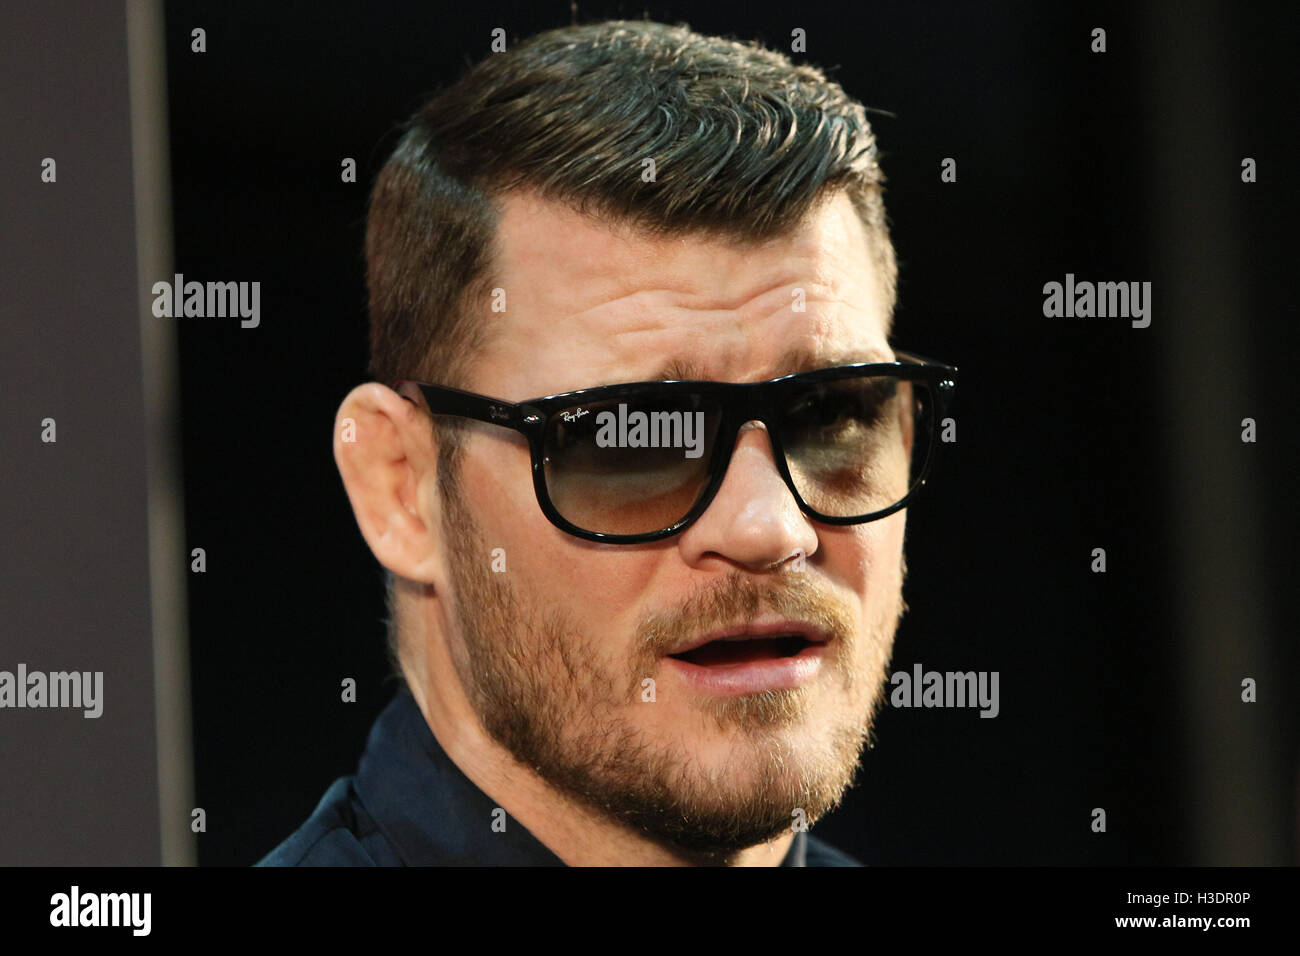 Manchester, UK. 6th October, 2016. UFC 204 - Media Day at Arena Manchester. Thursday the 6 of Oct. 2016. Michael Bisping answers media questions ahead of UFC 204.   Credit:  Dan Cooke/Alamy Live News Stock Photo